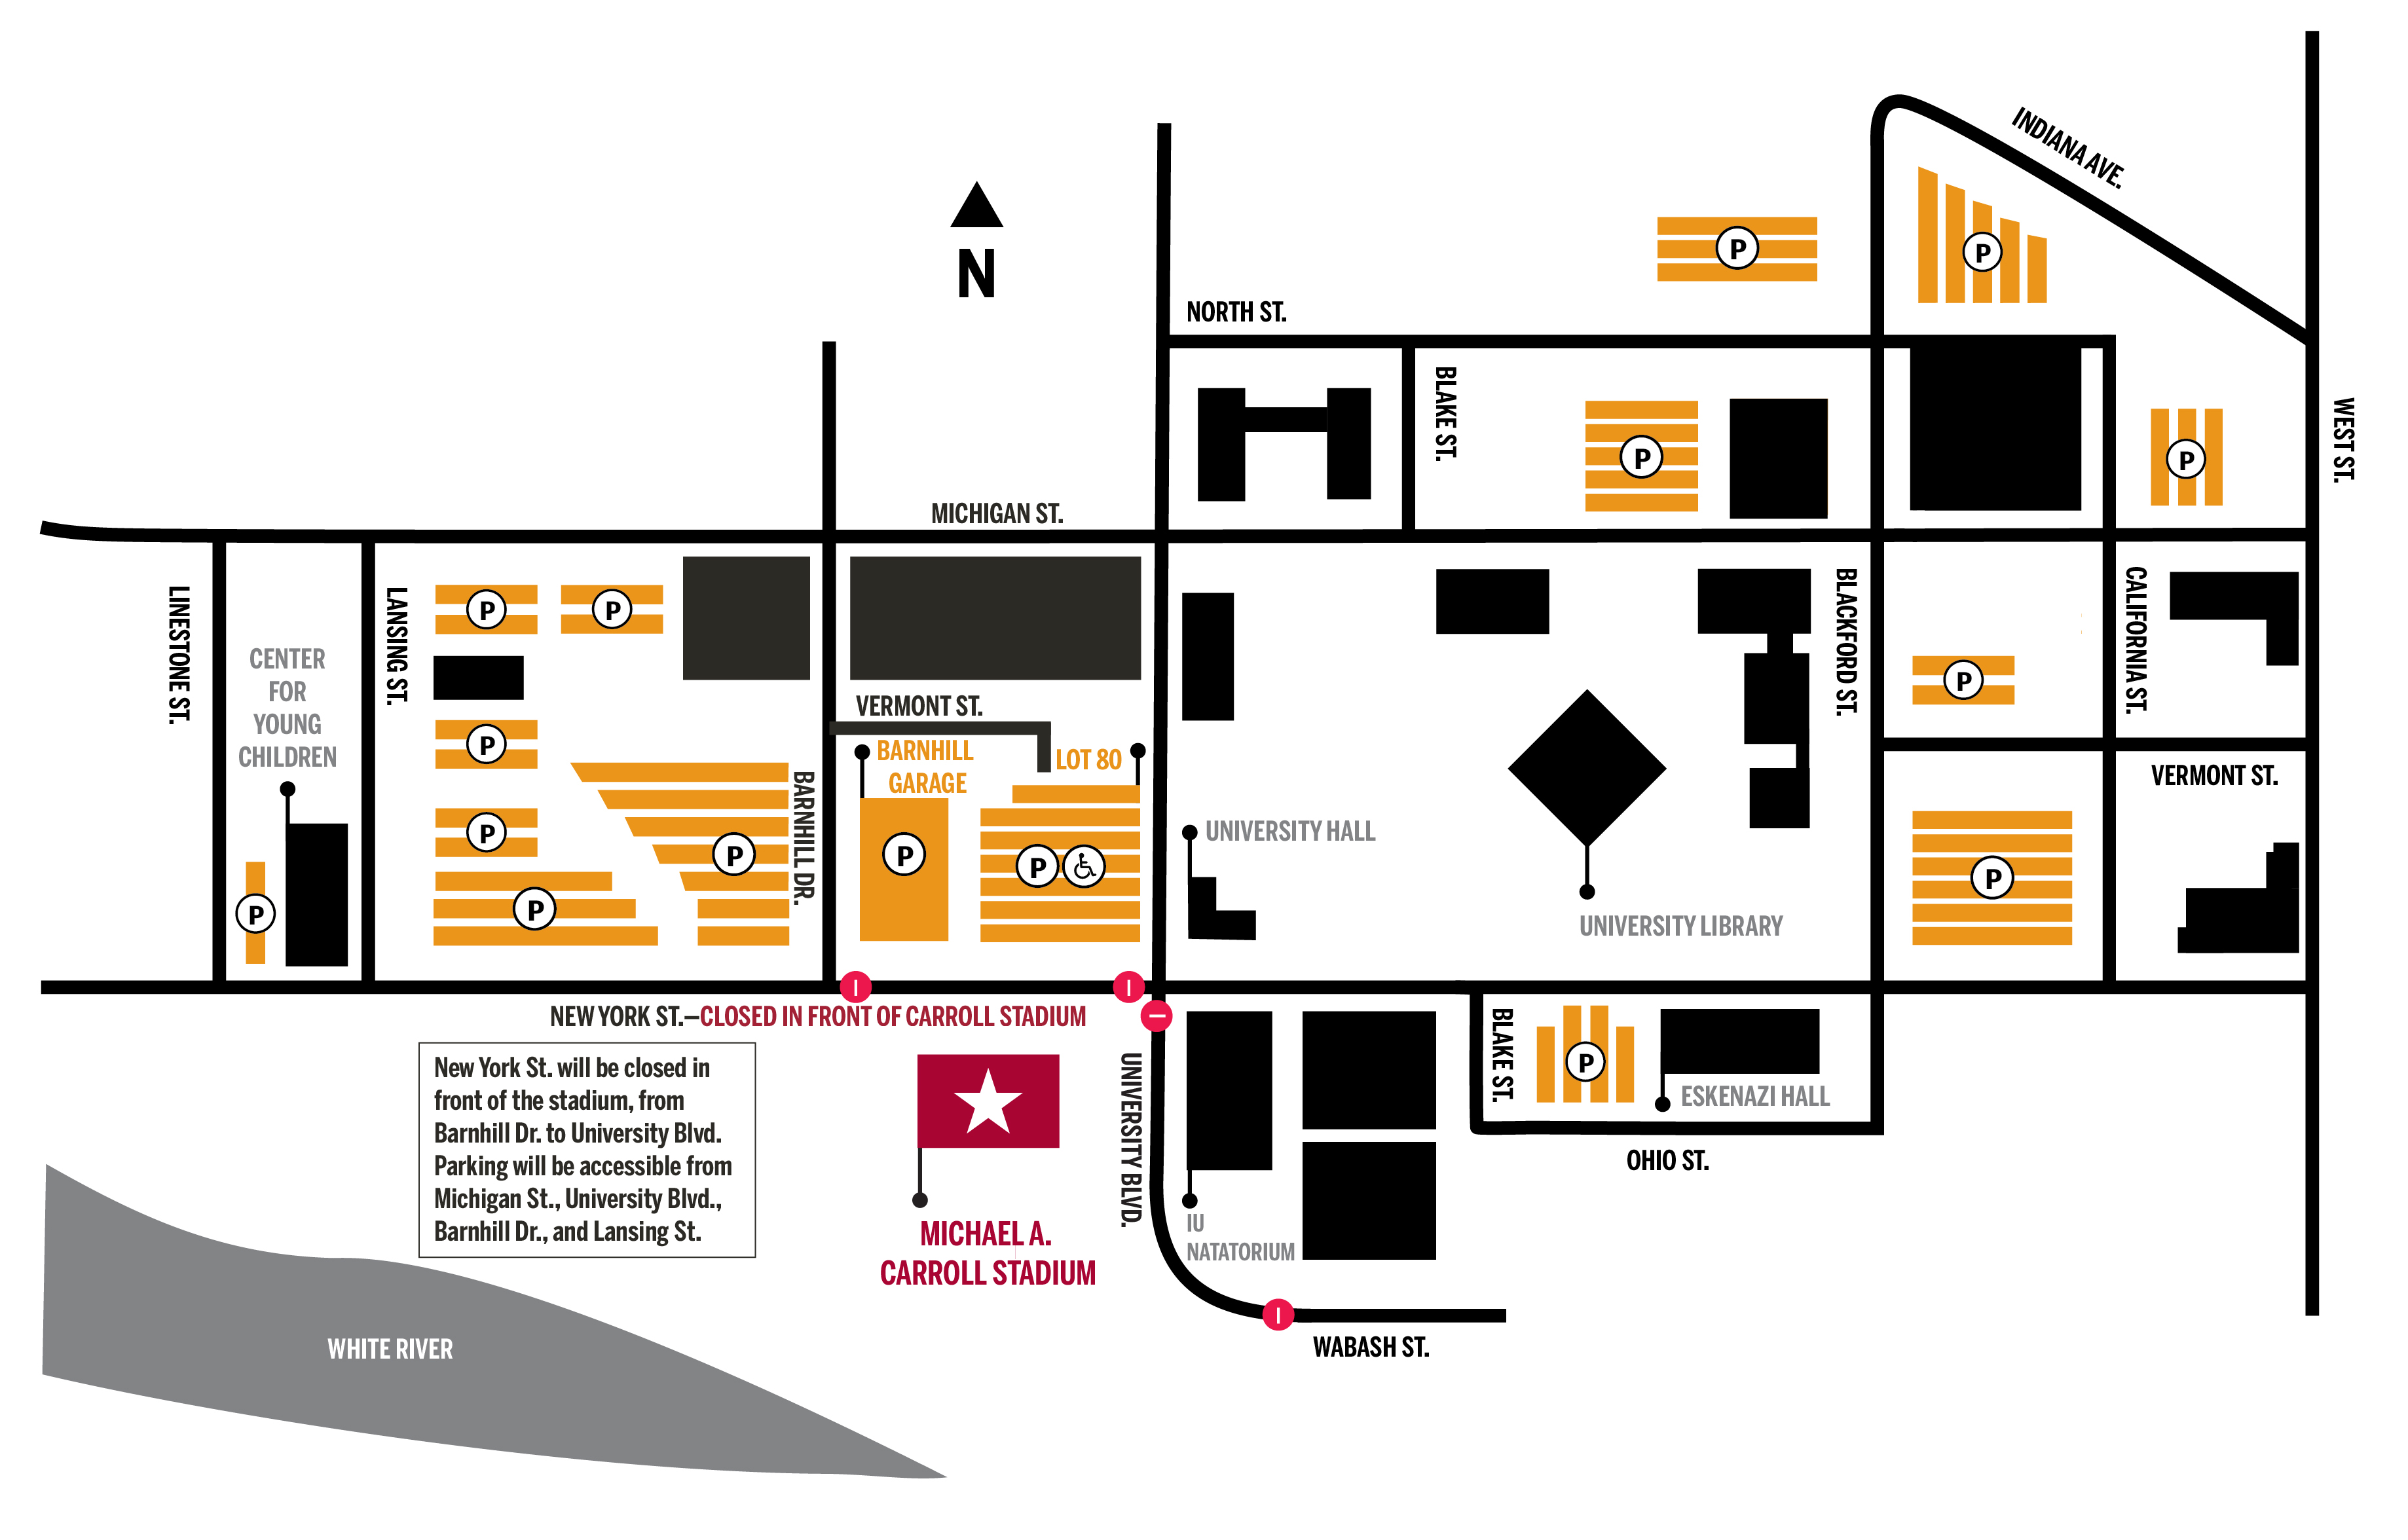 IUPUI carroll stadium map for guests